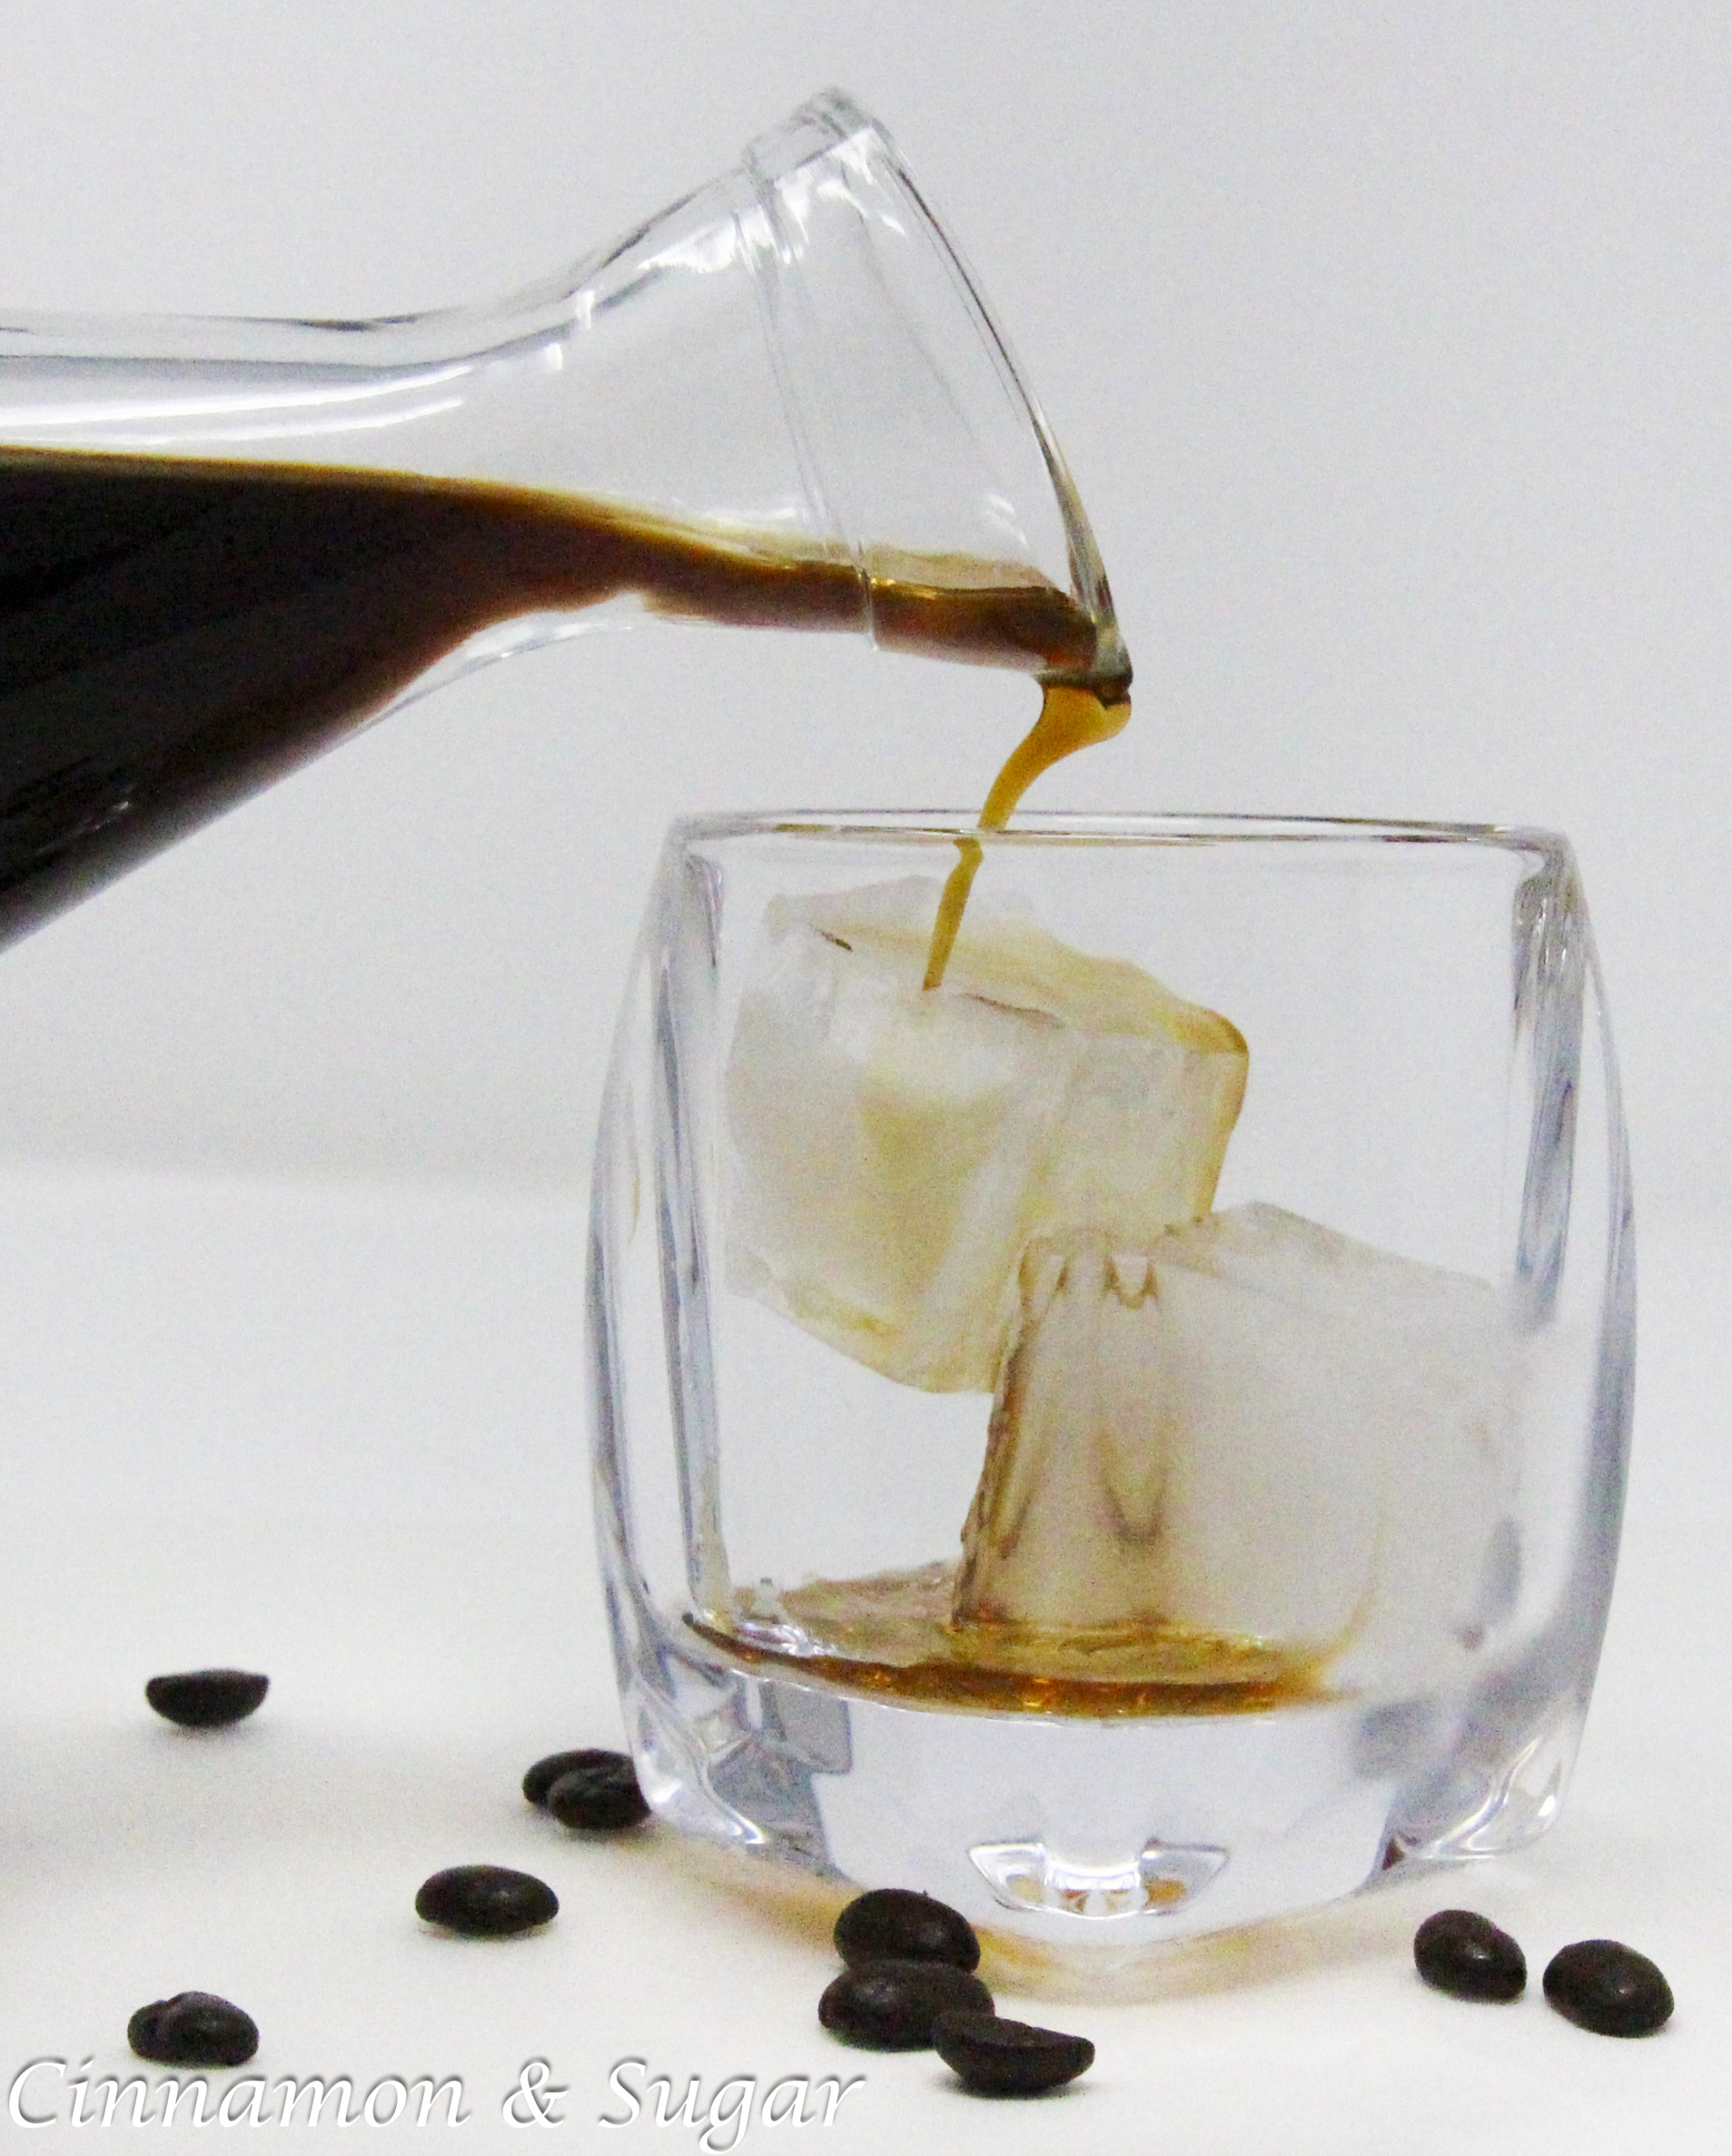 On it's own or as the base for your own fabulous coffee concoction, this cold brew coffee is a smooth, delicious (and oh so easy) way to become your own favorite barista! Recipe shared with permission granted by Tara Lush, author of COLD BREW CORPSE.